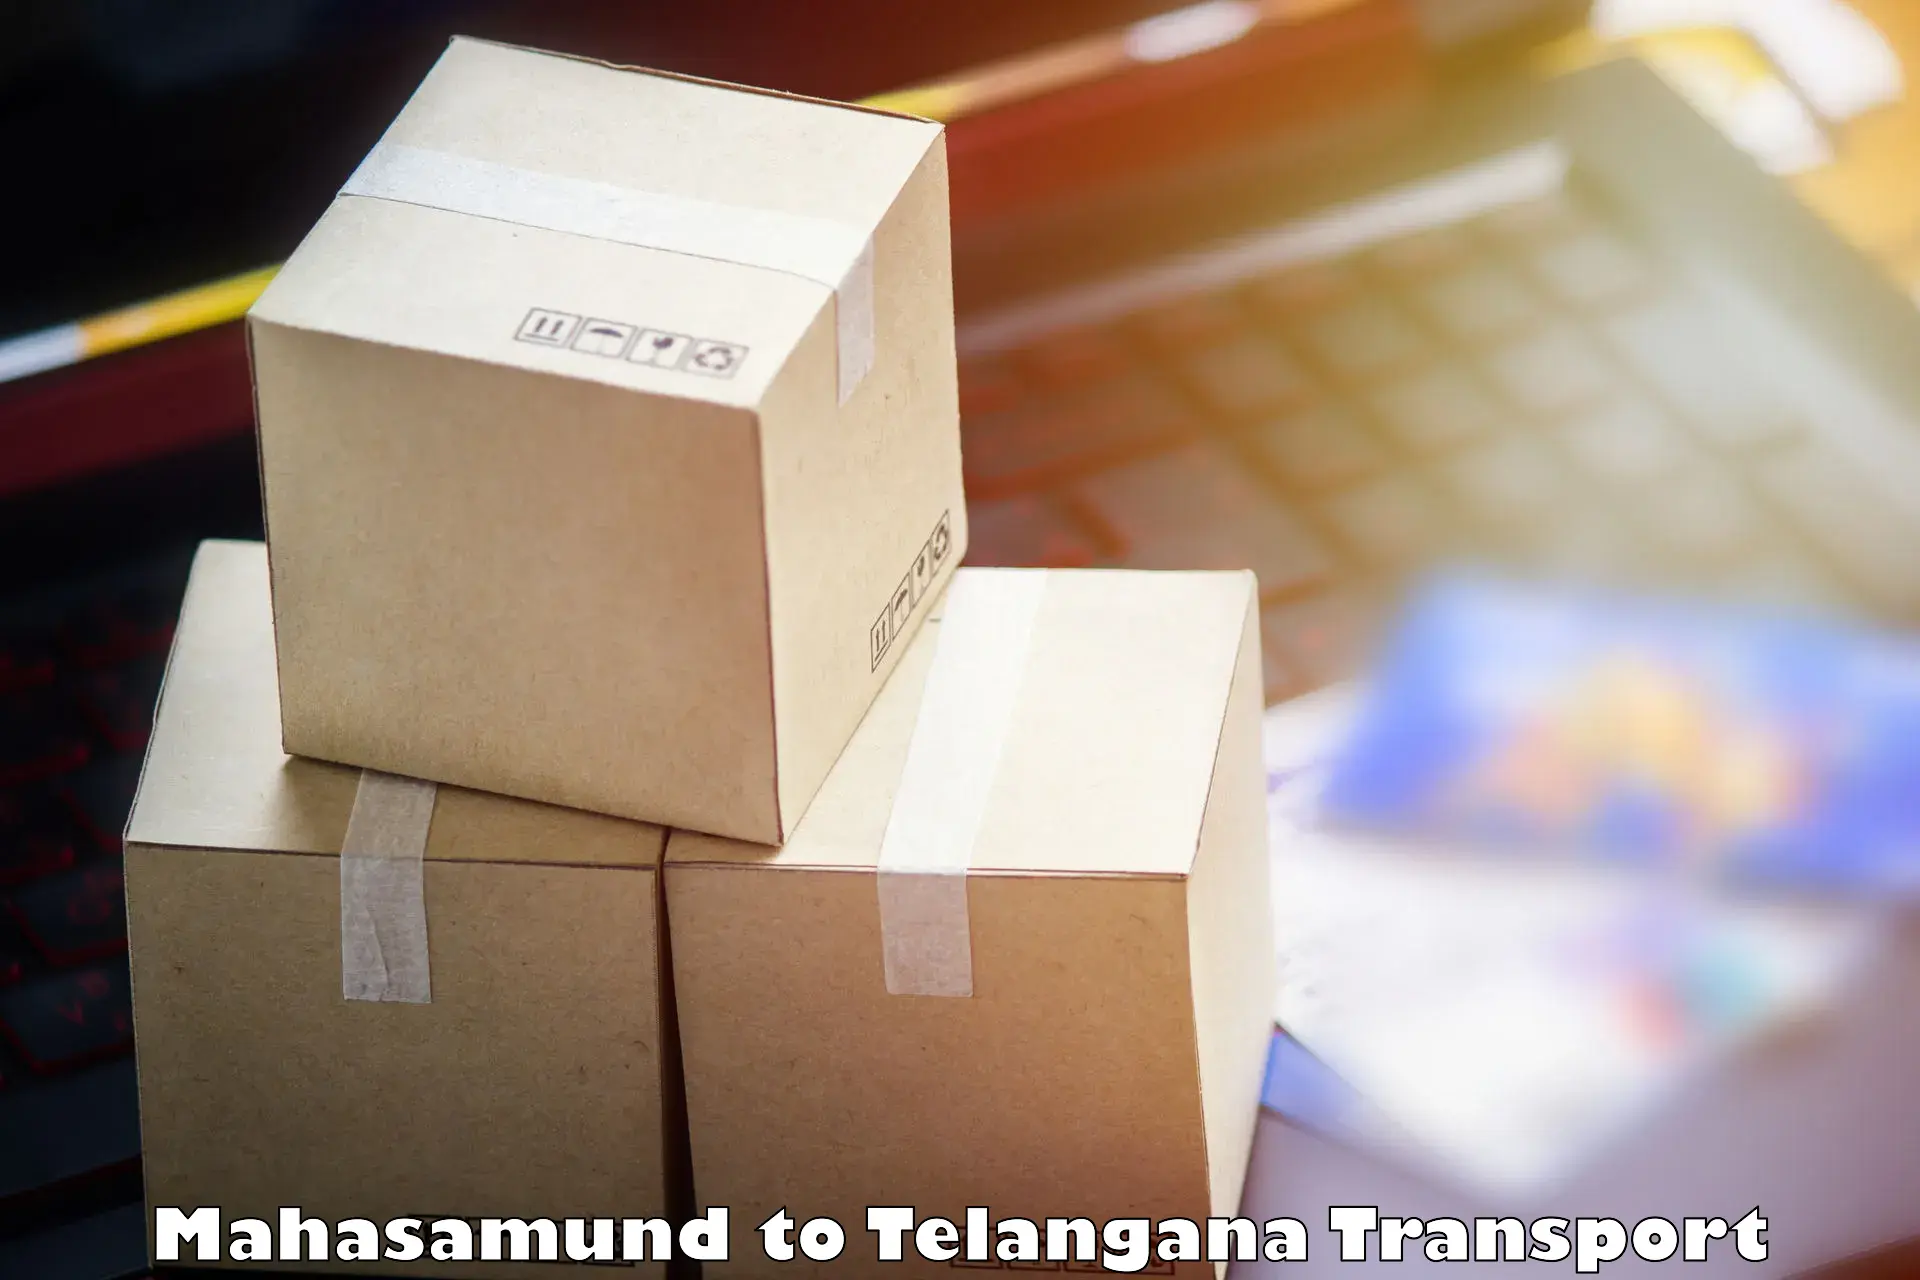 India truck logistics services Mahasamund to Sultanabad